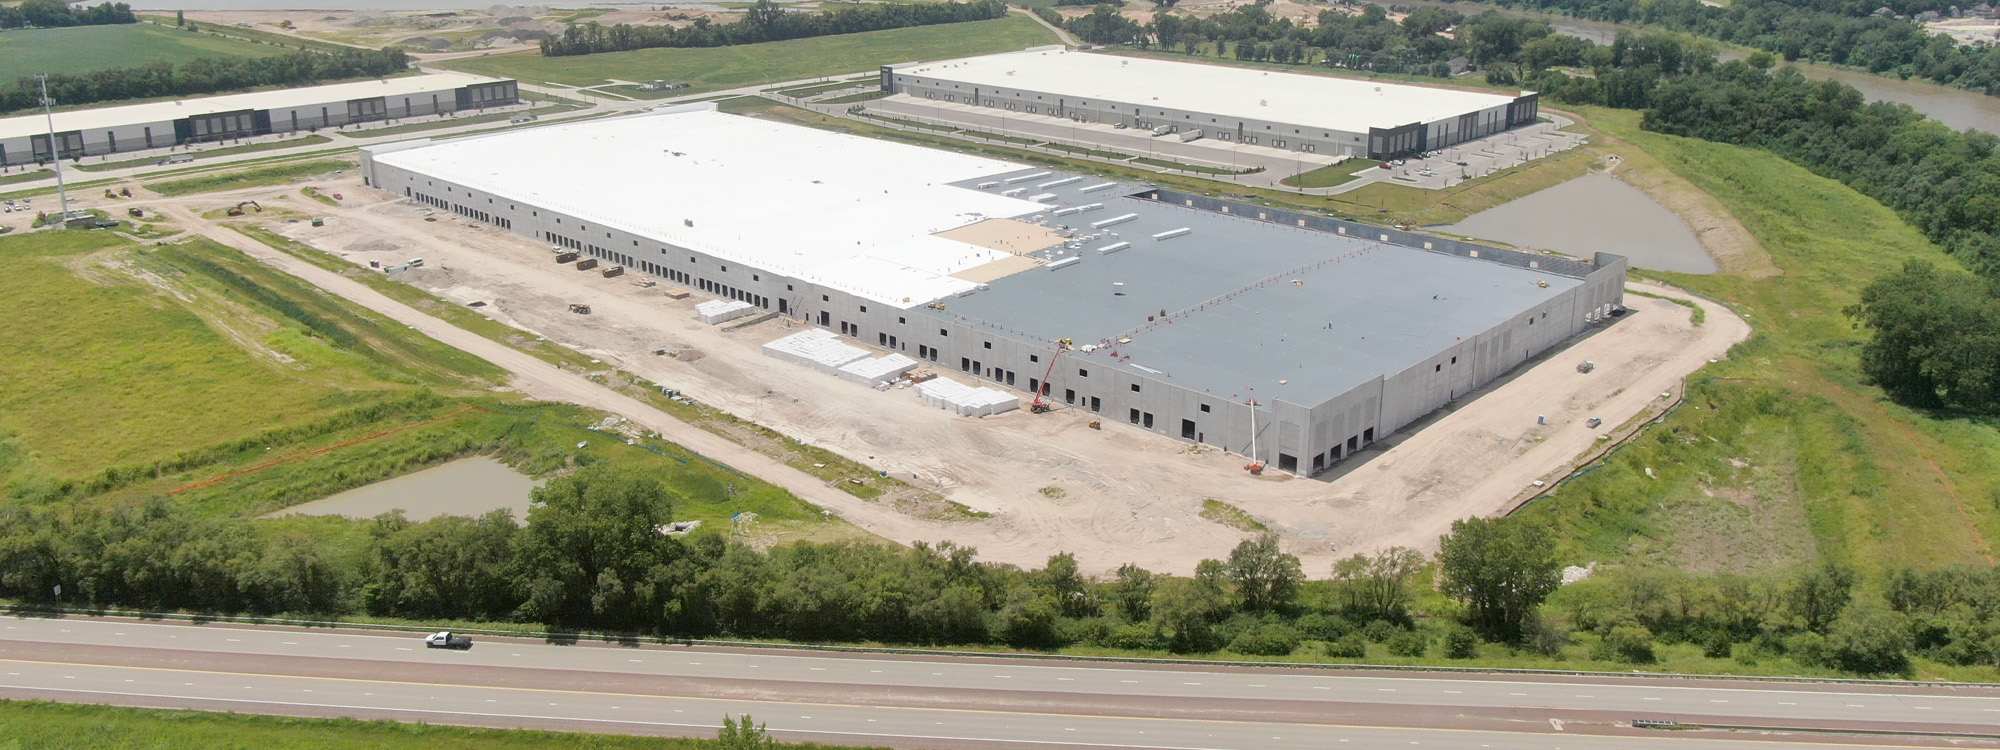 Heartland Logistics Park Building III - 323,851 SF of industrial space available for lease in Shawnee, Kansas